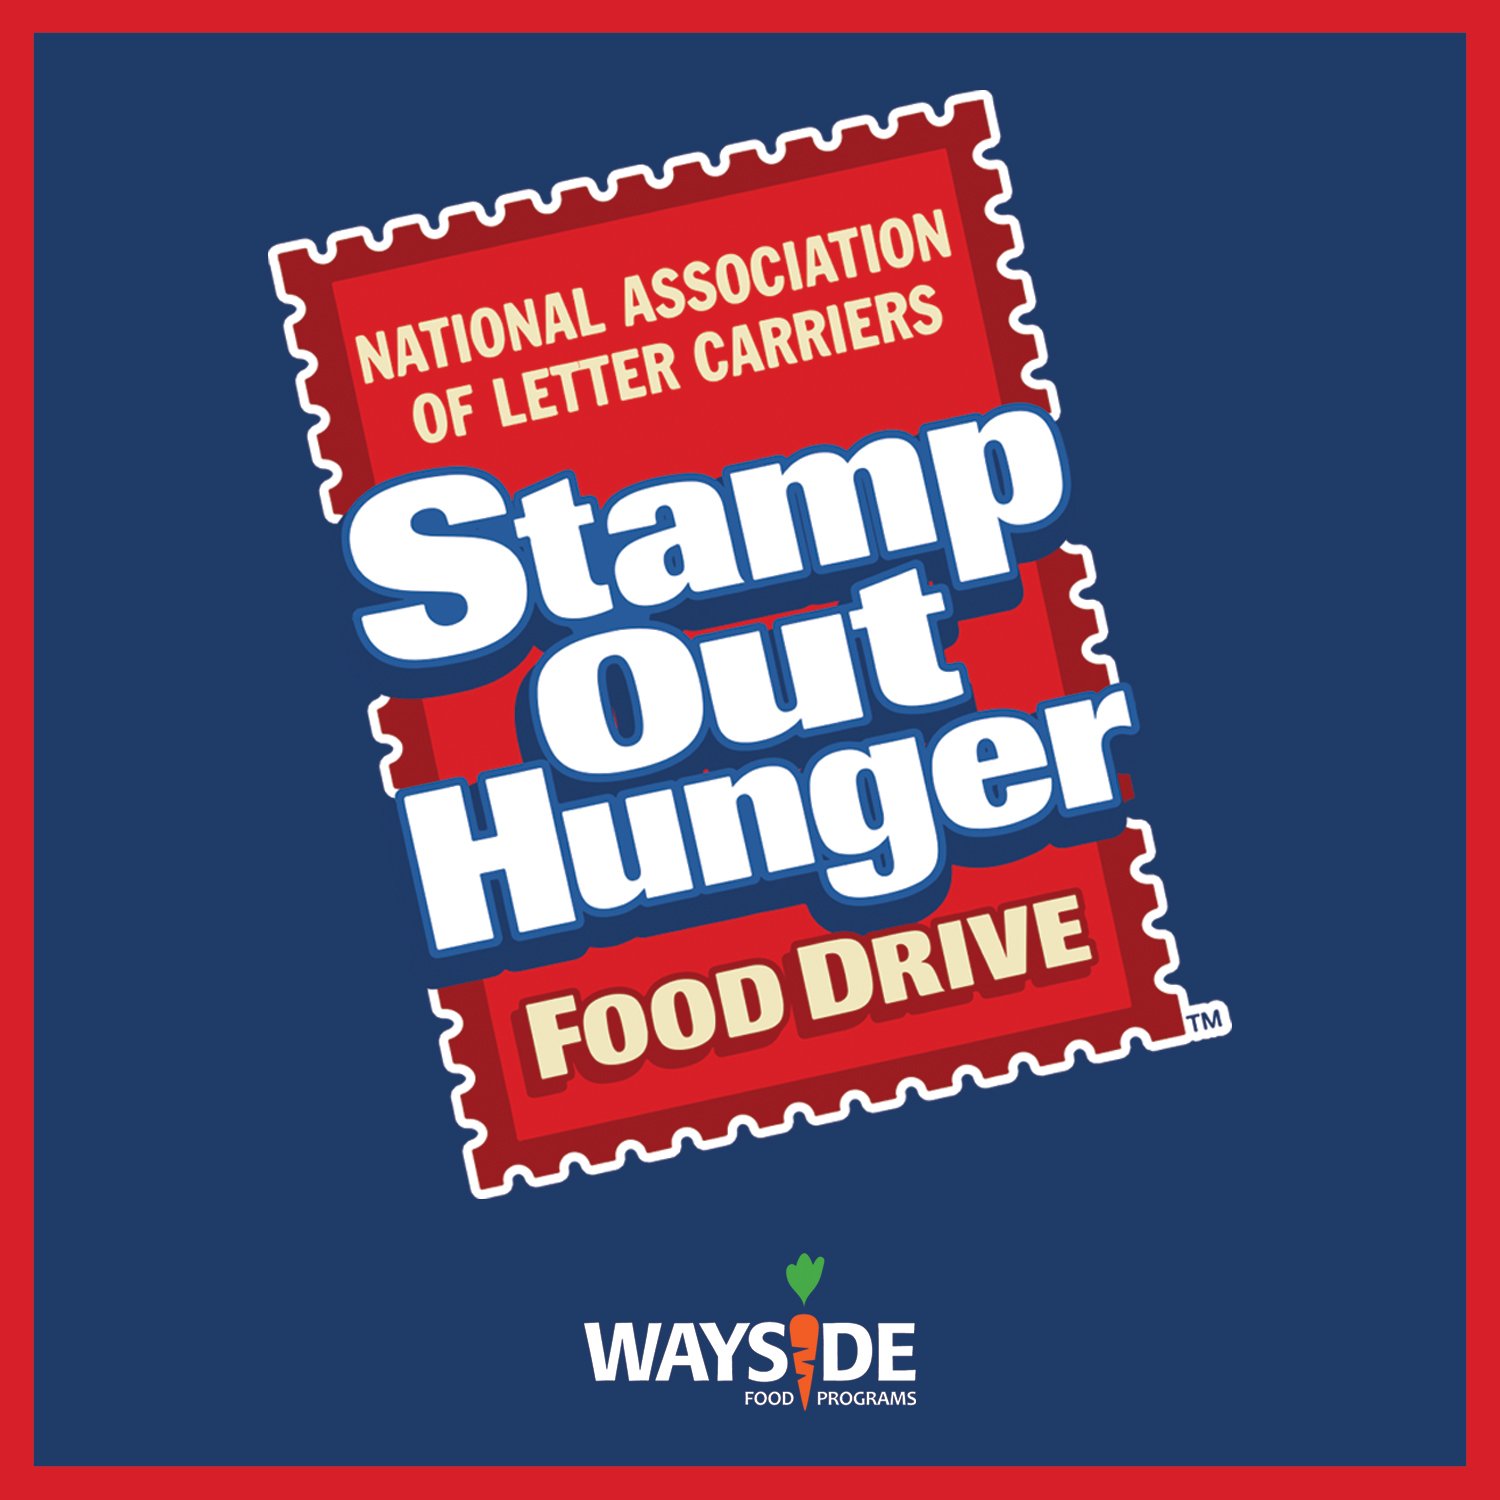 **Please share!** This Saturday, May 11th is the 2024 National Association of Letter Carriers &quot;Stamp Out Hunger&quot; Food Drive! To participate, leave your donation of non-perishable items in a bag near your mailbox. Your mail carrier will take